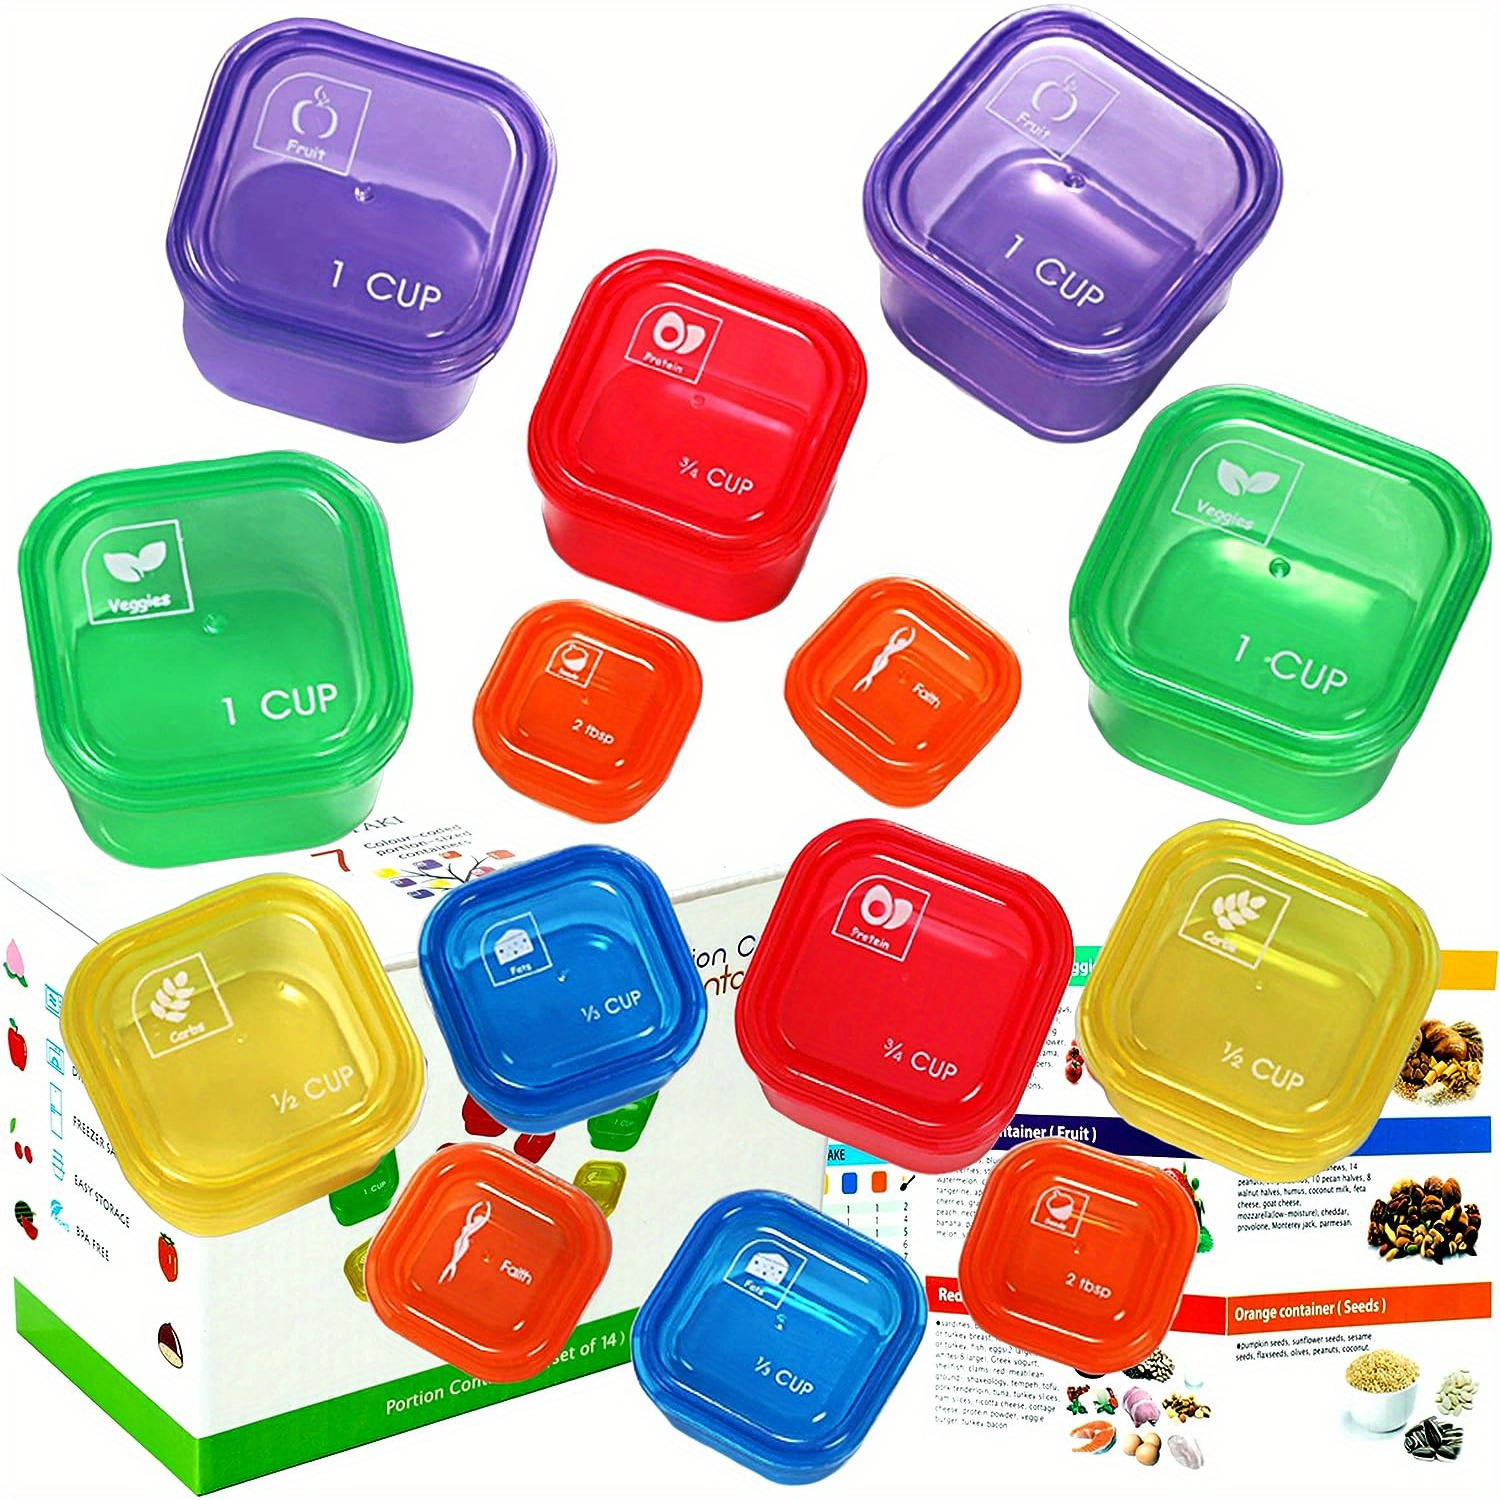 21 Day Lose Weight Portion Control Containers Kit 14 Pieces, BPA Free Food  Container Multi-Colors,Label-Engraved for Diet Planl